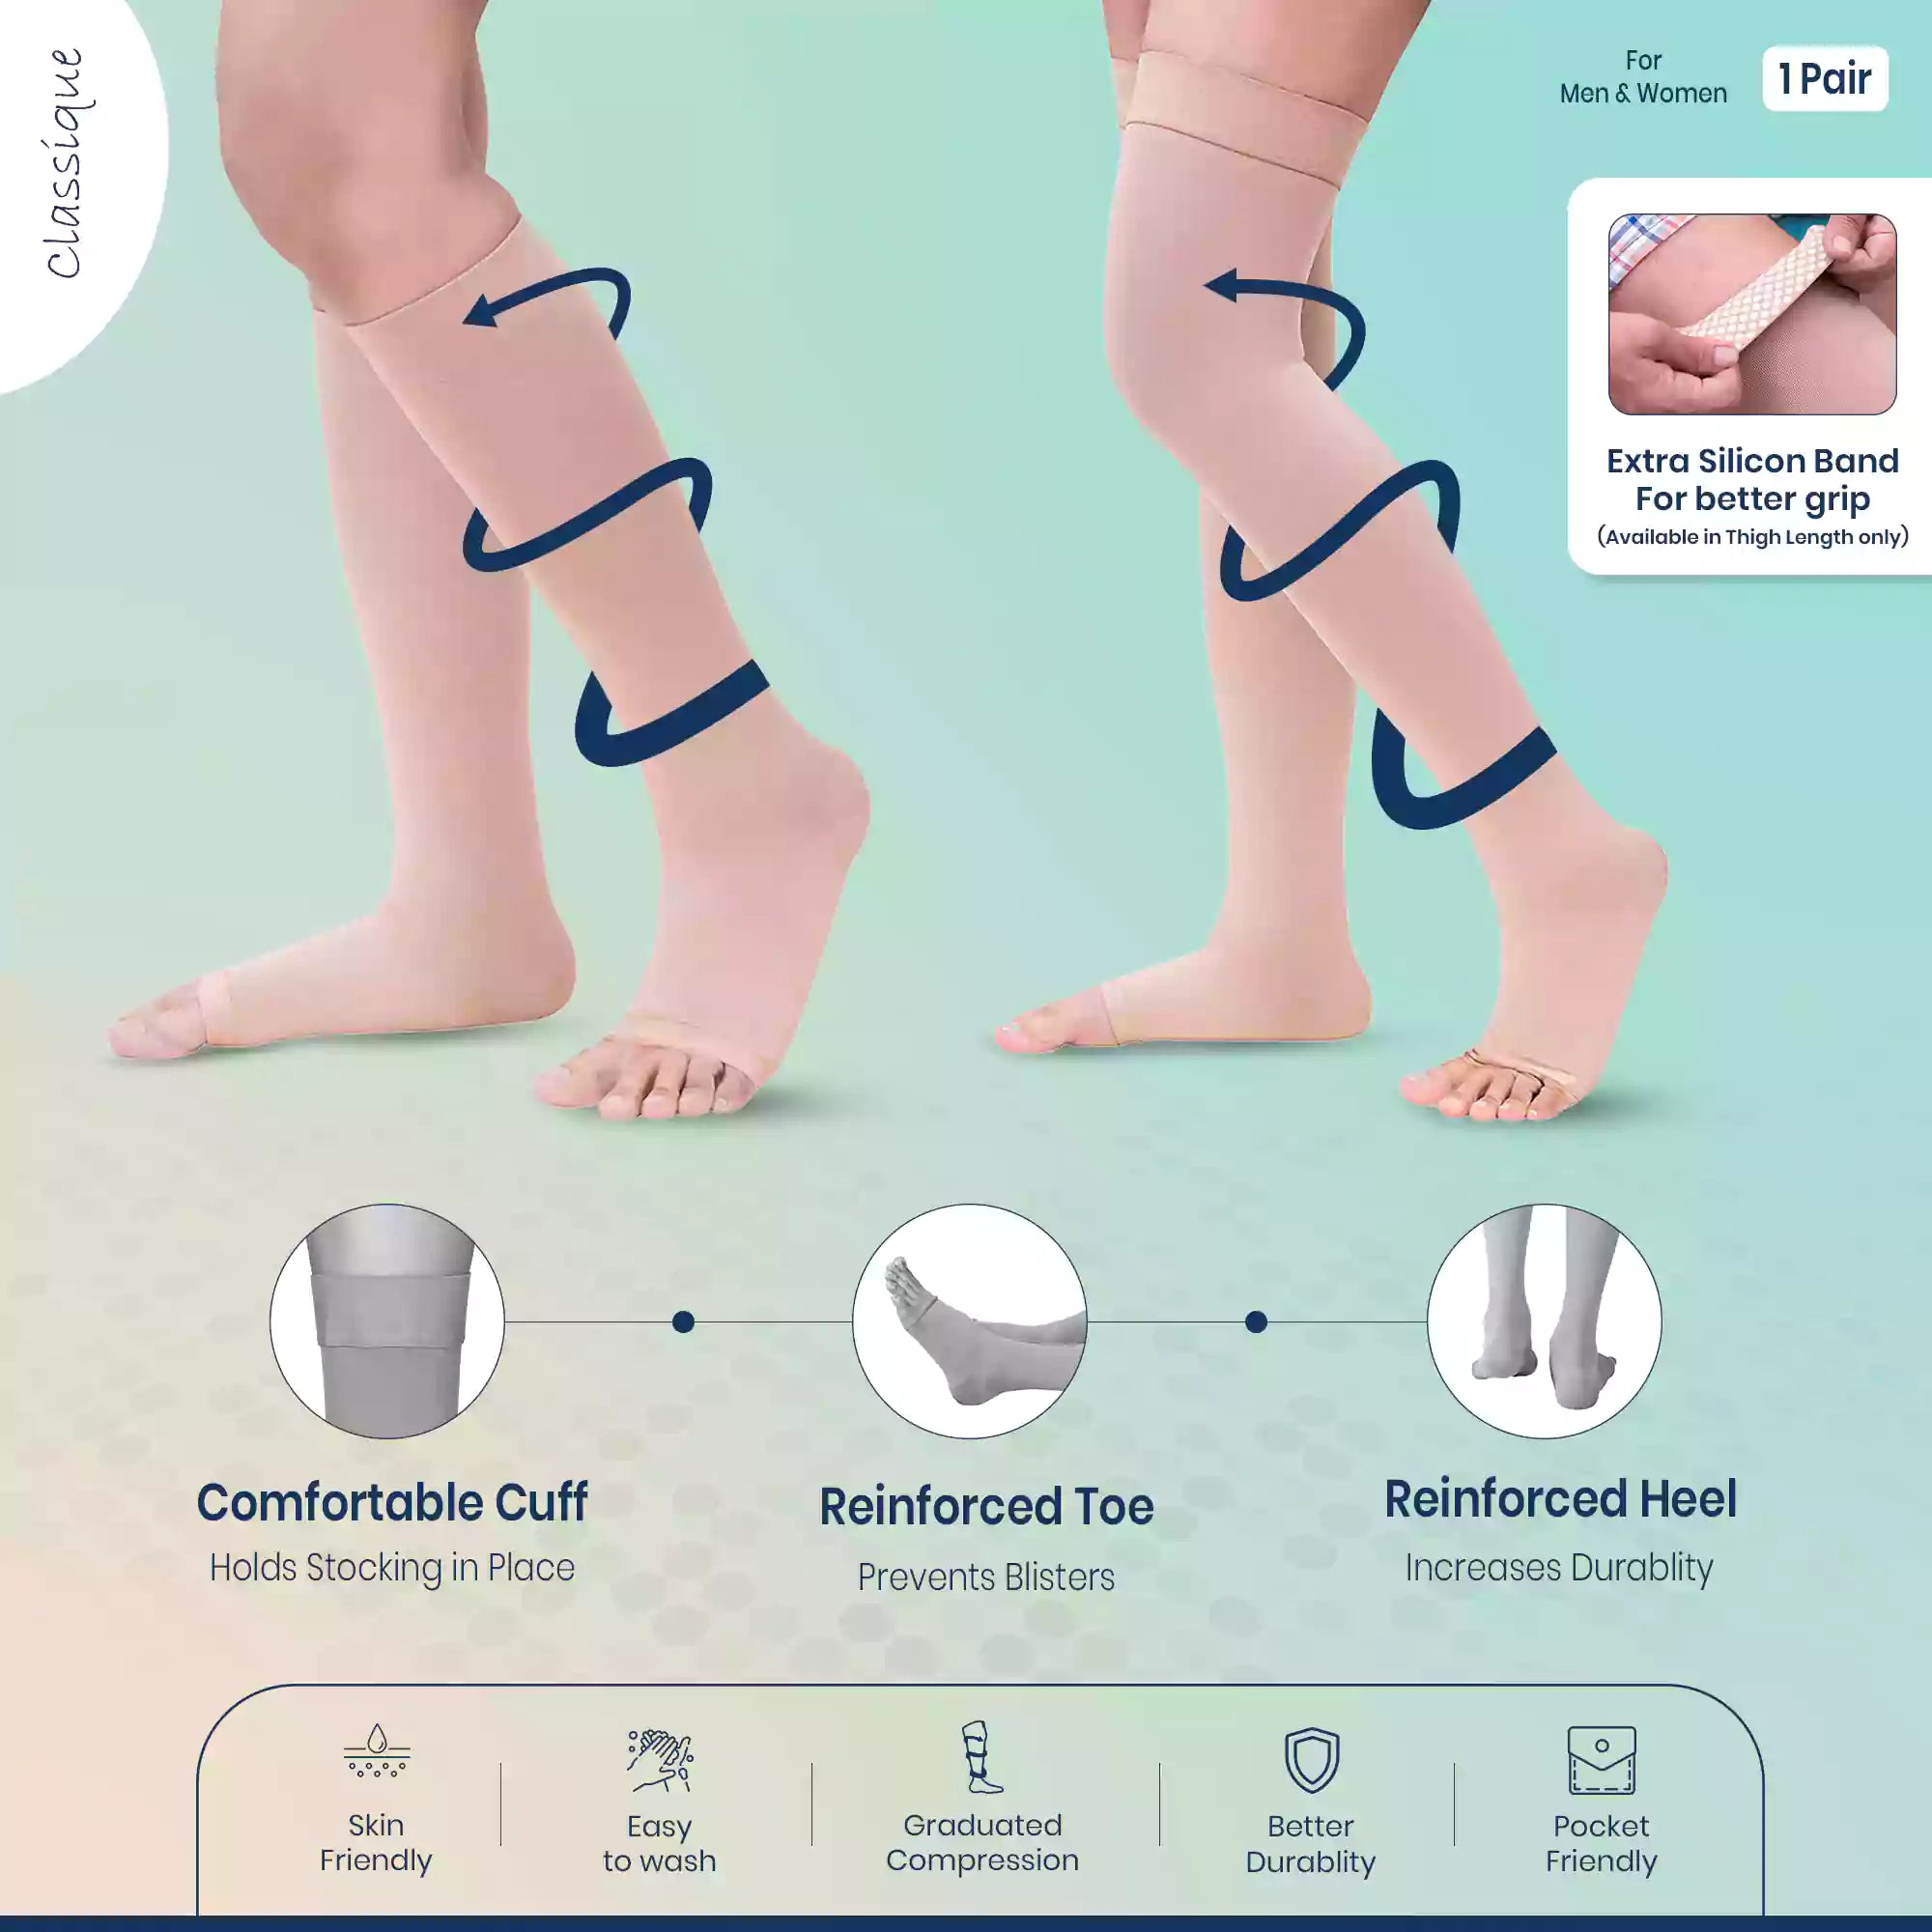 Compression socks for varicose veins - Style 66 — CYSM Shapers